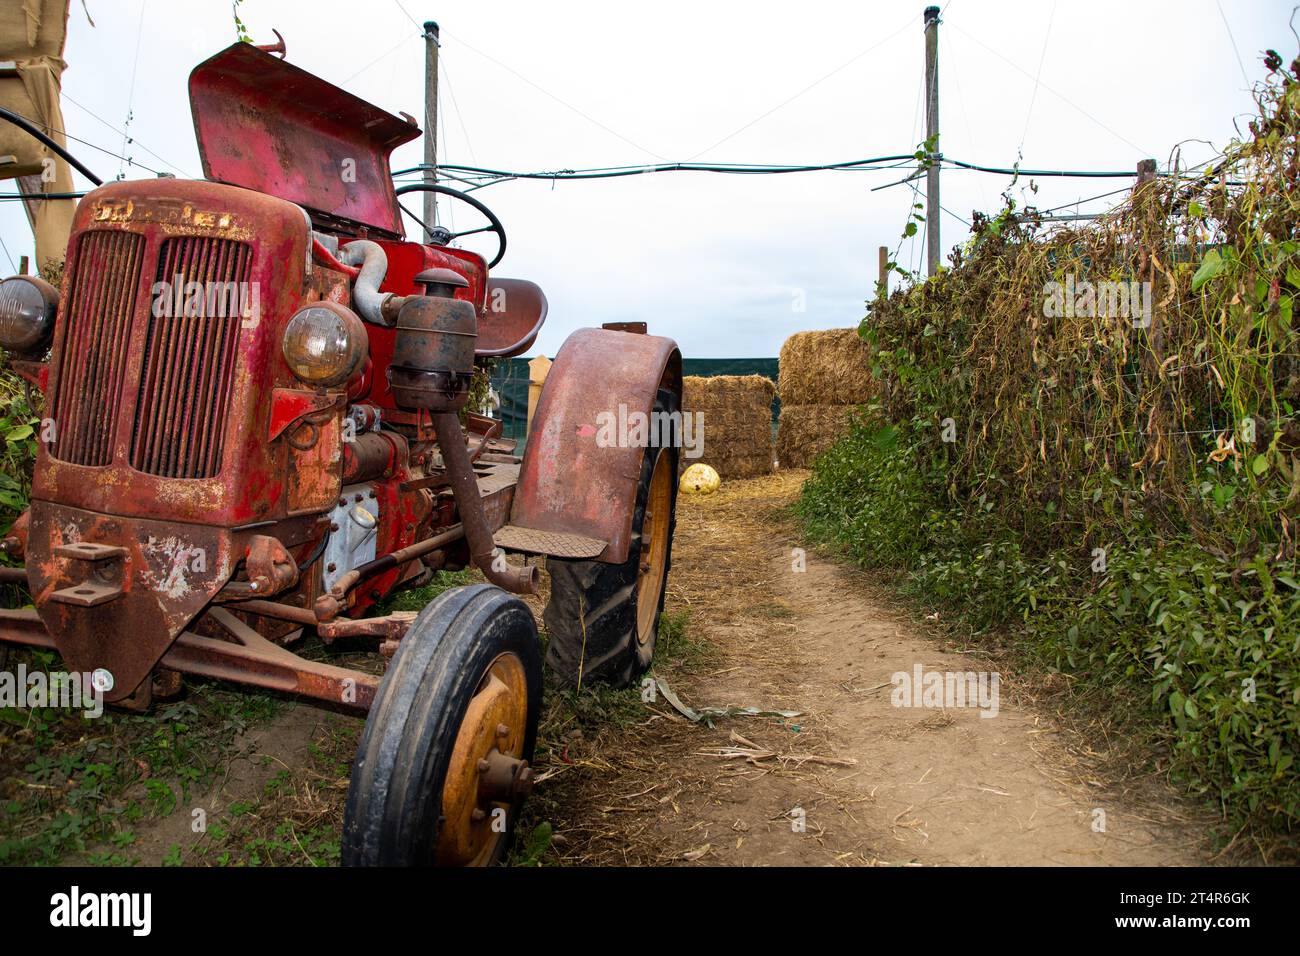 old tractor in a cultivated field Stock Photo